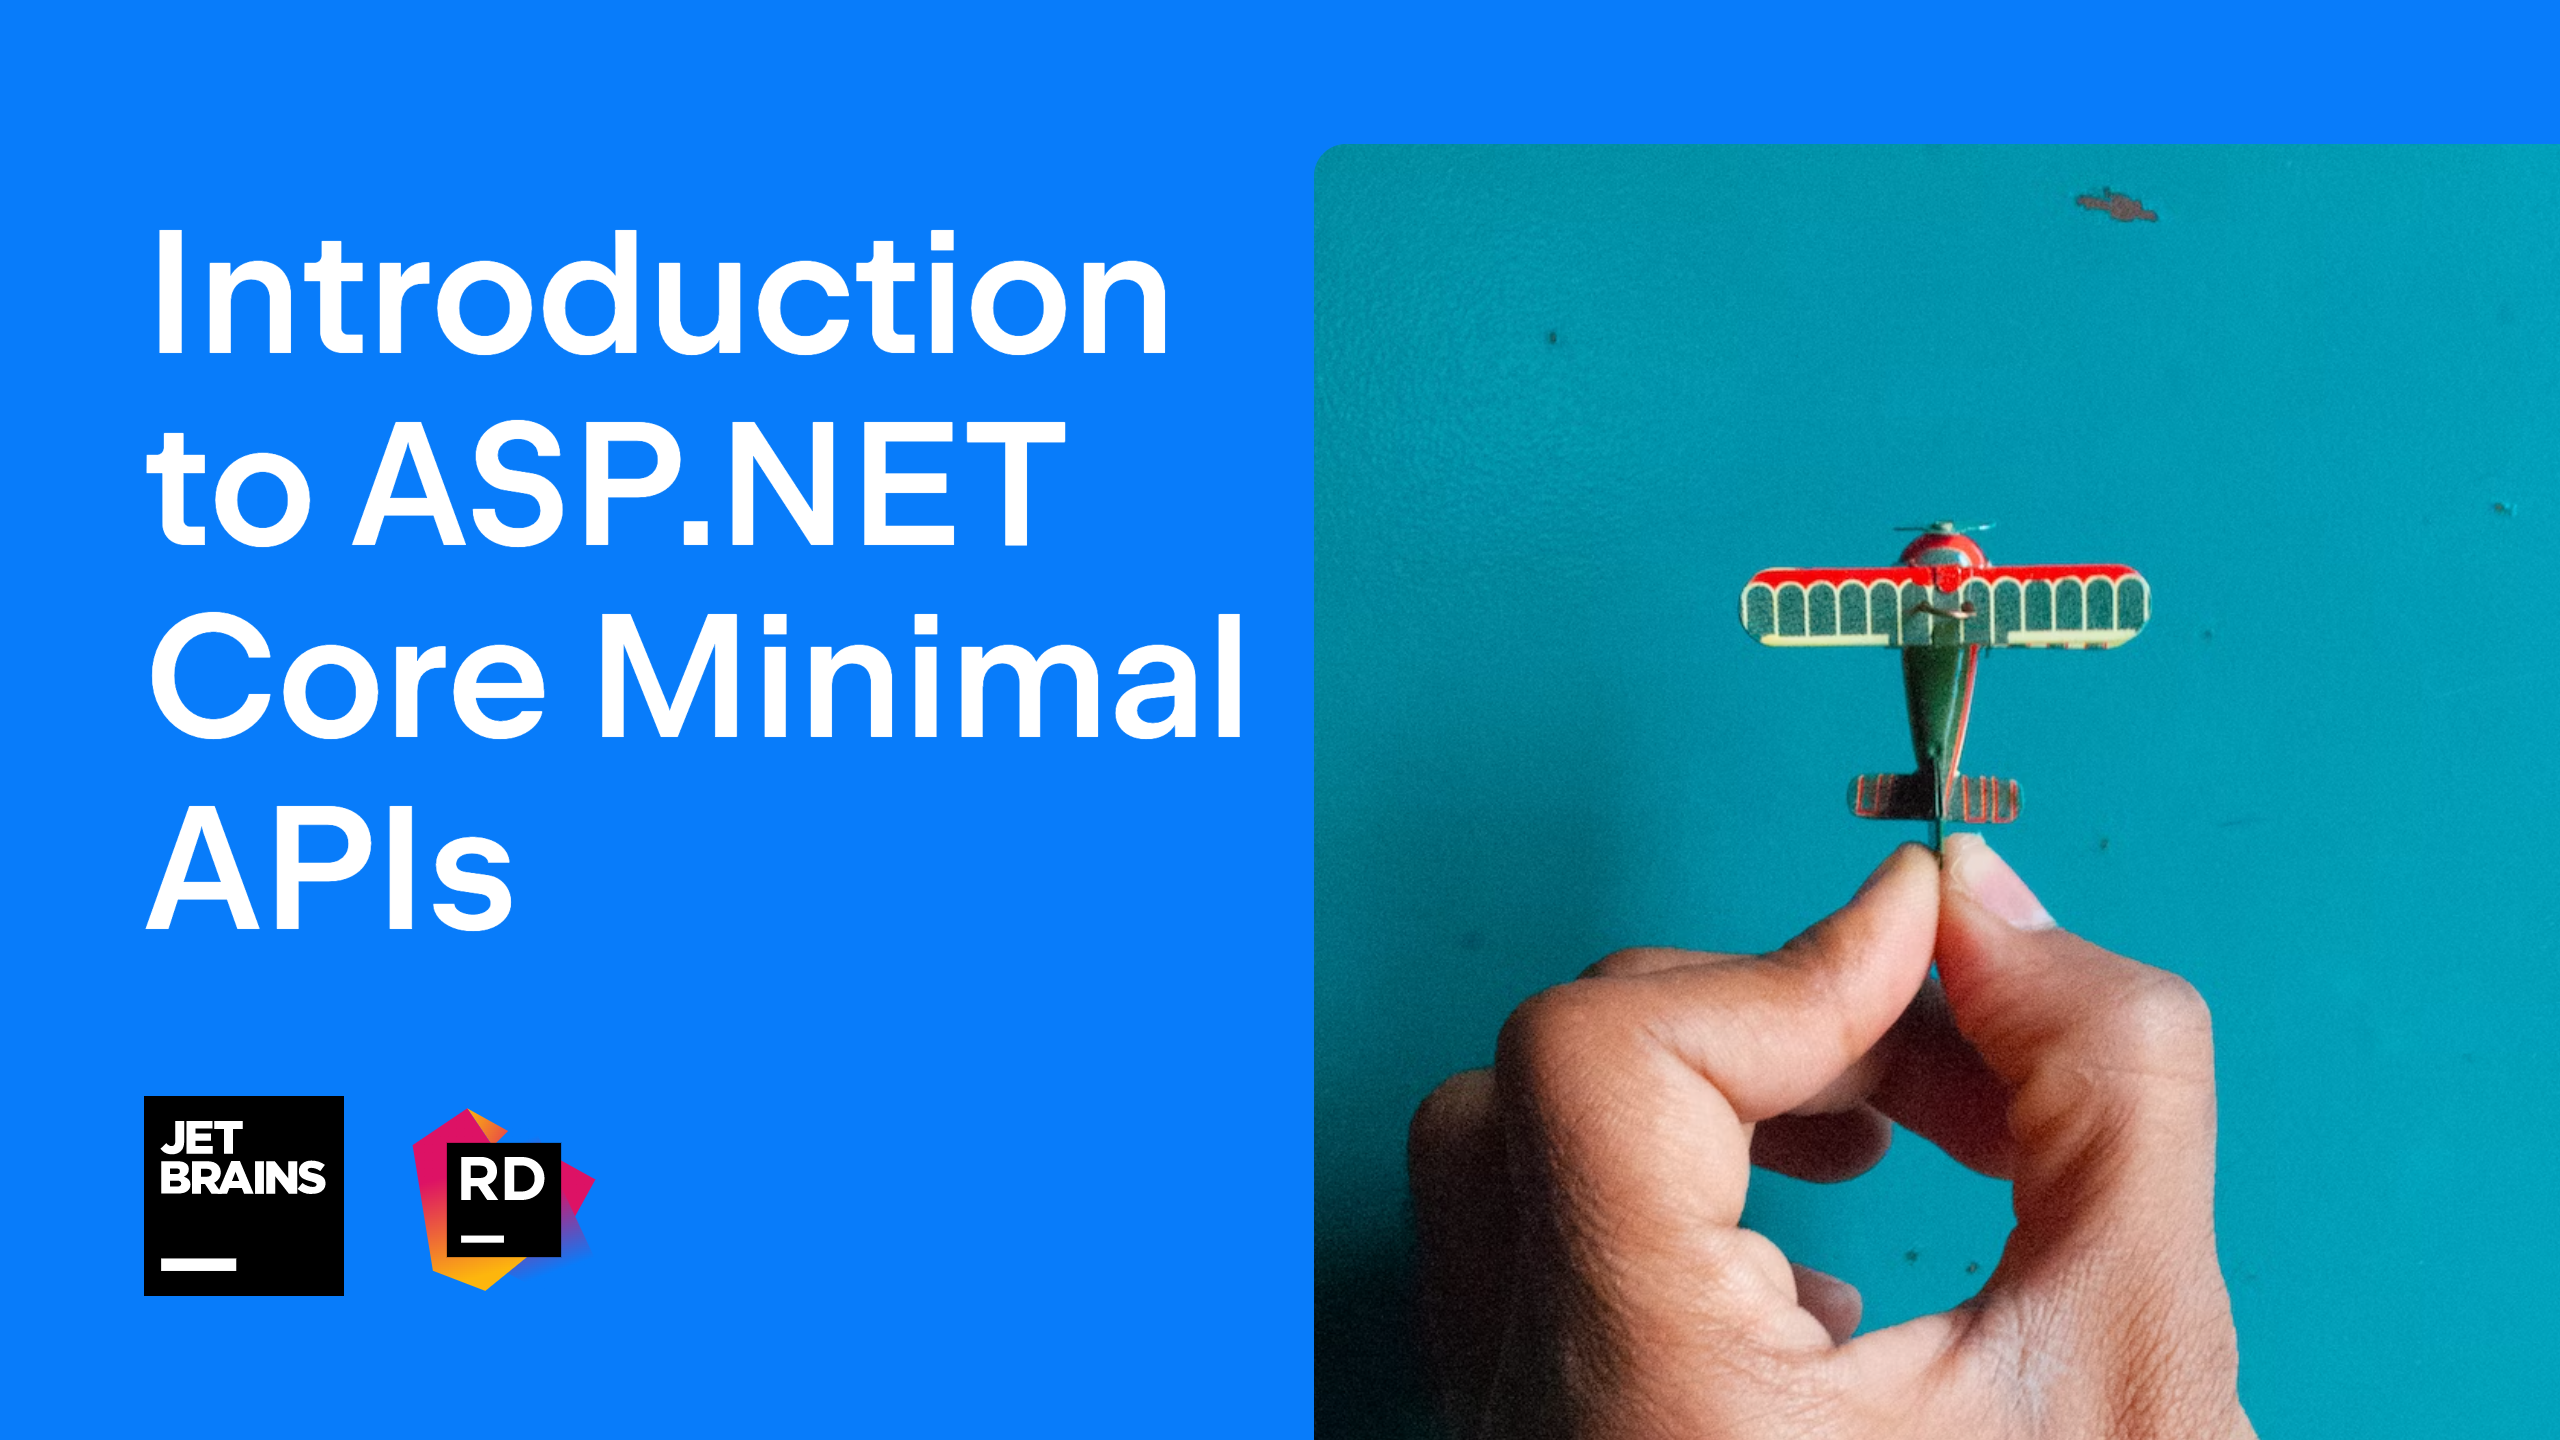 Introduction to ASP.NET Core Minimal APIs | The .NET Tools Blog